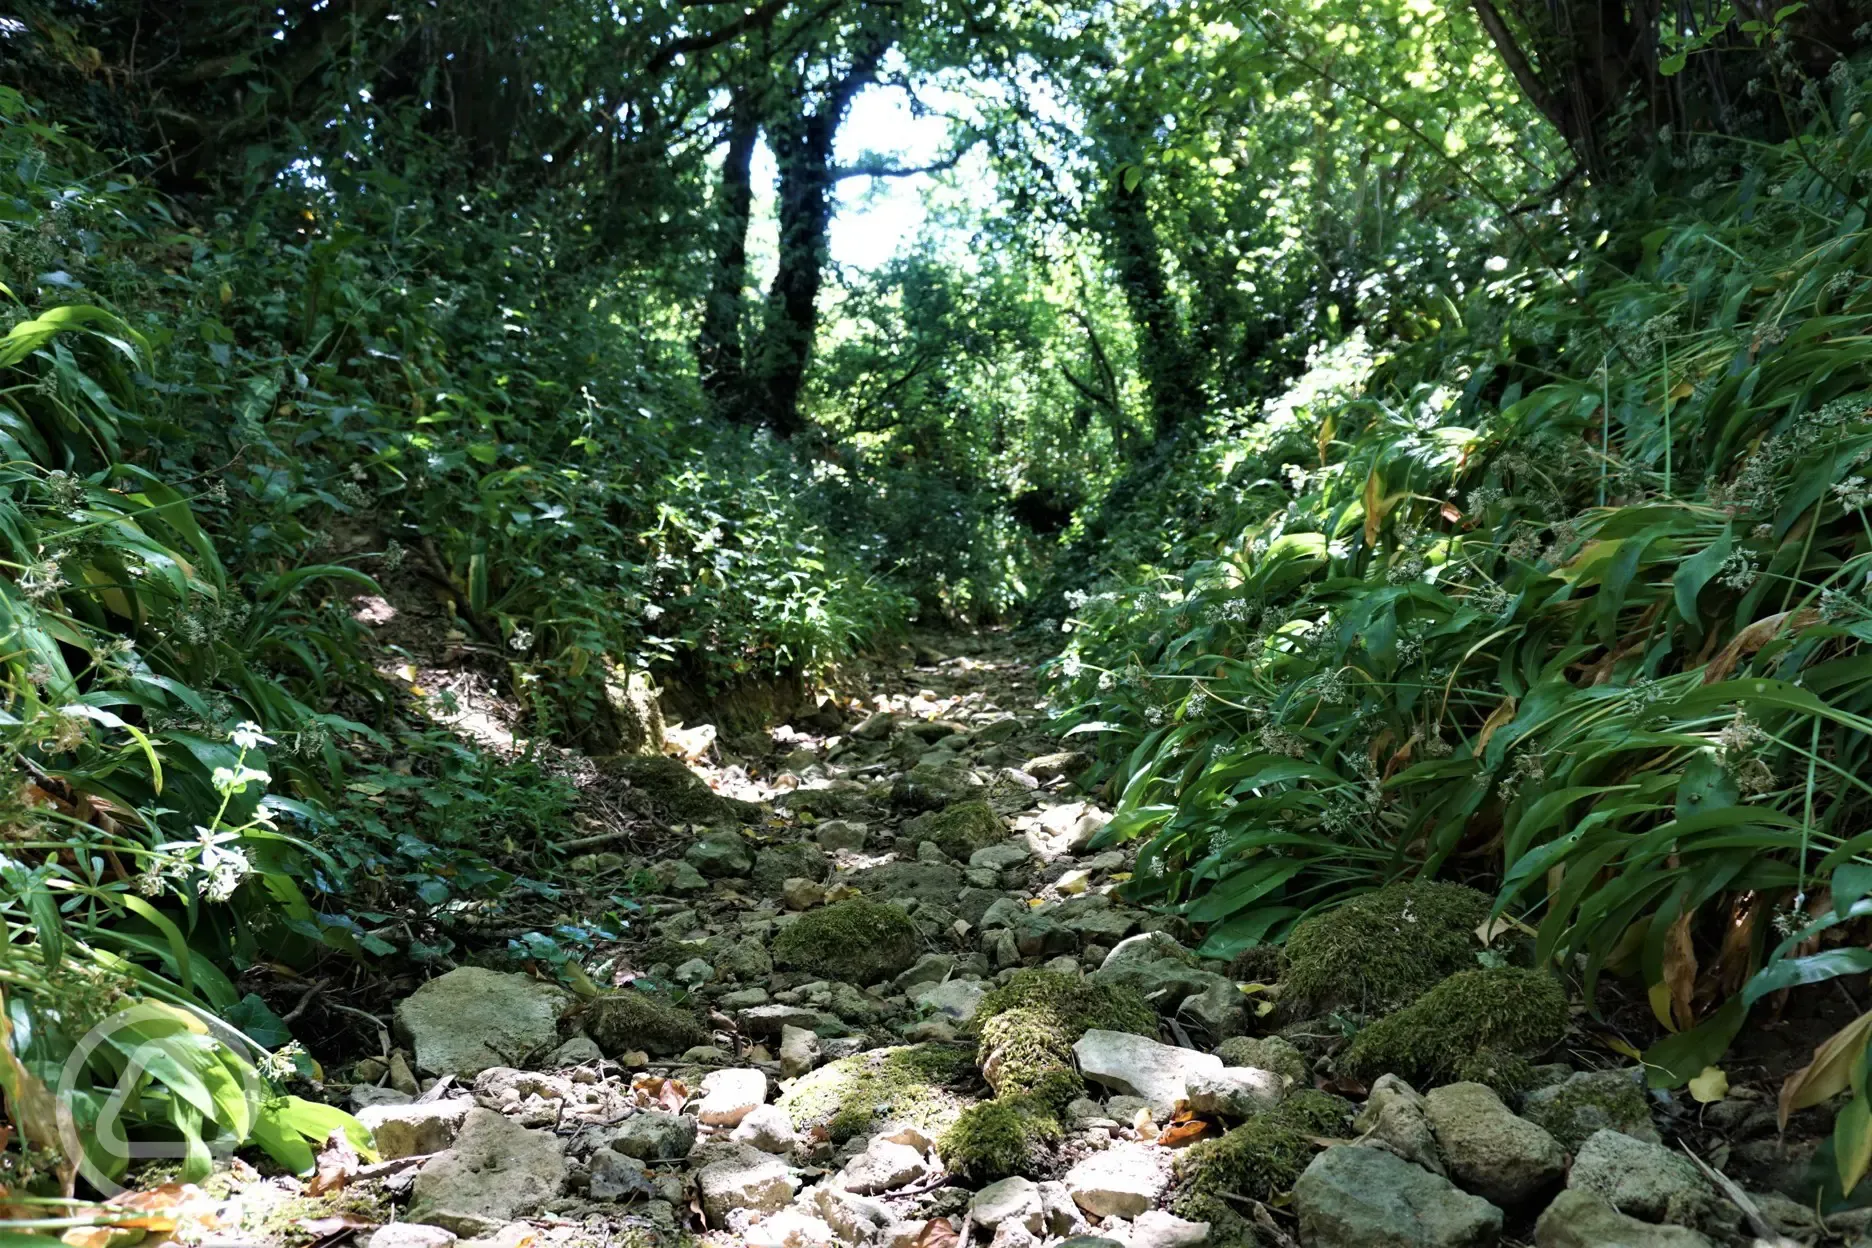 dry wooded stream - suitable for walking along the dry bed